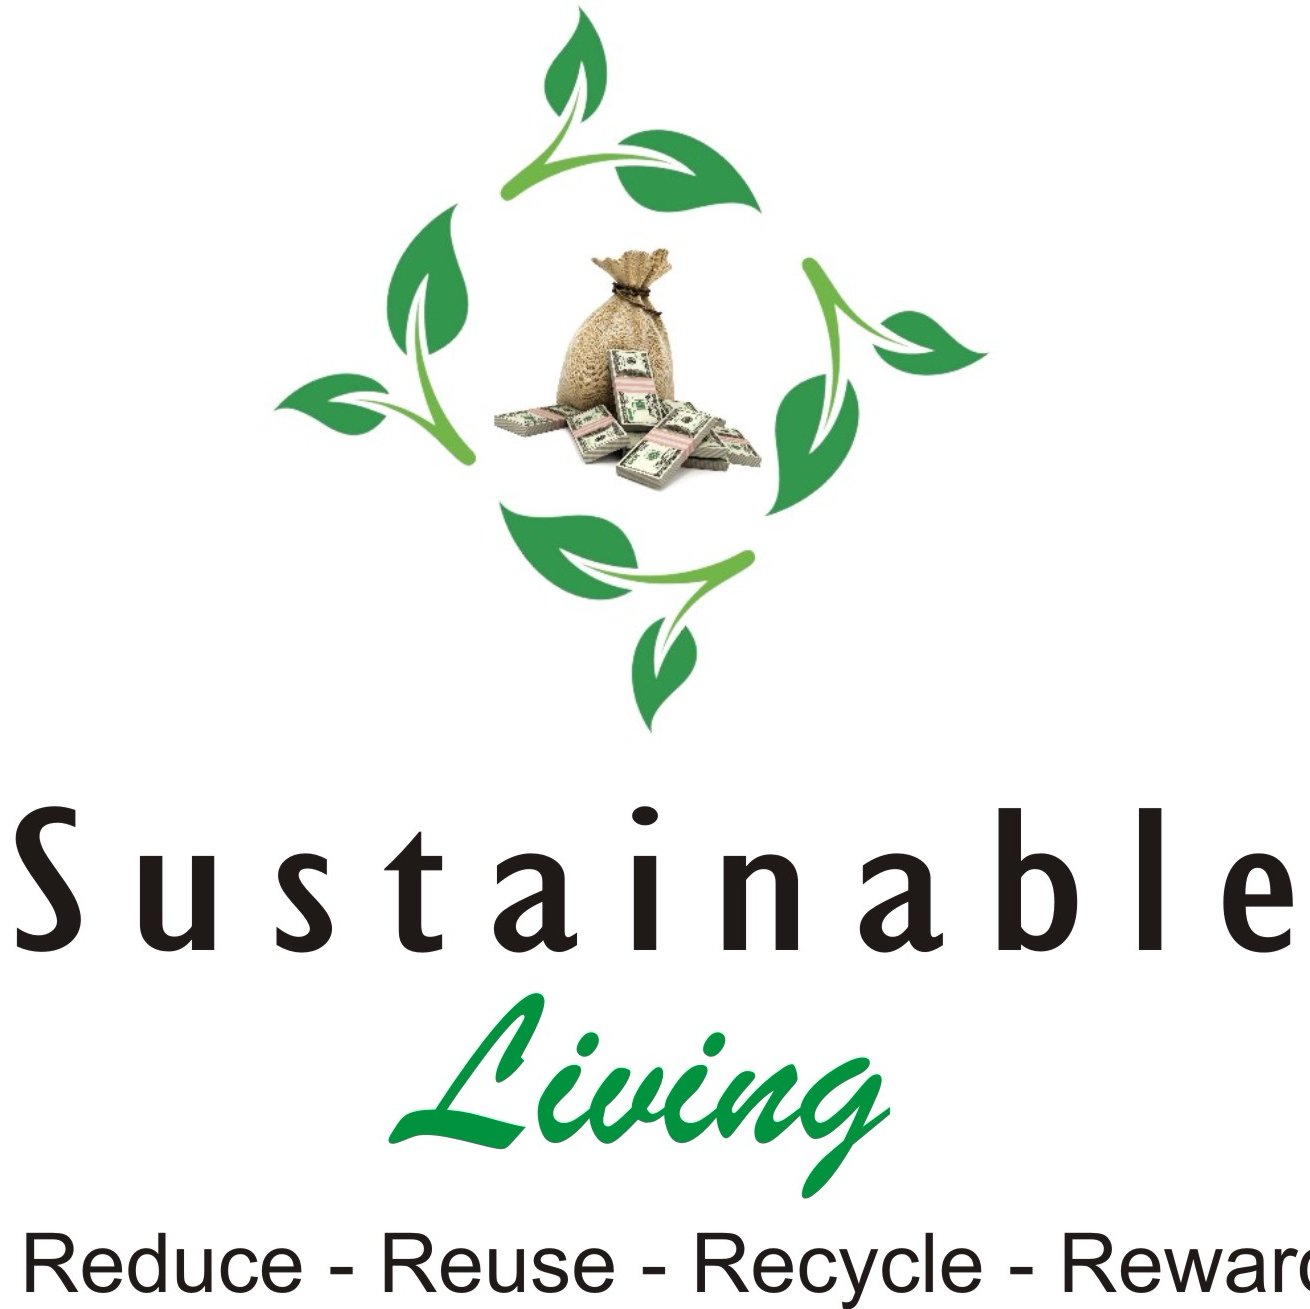 https://t.co/yWKSOldsju is India's First B2B business / conservation development platform for all sorts of Eco-friendly products. REUSE-REDUCE- RECYCLE -REWARDS